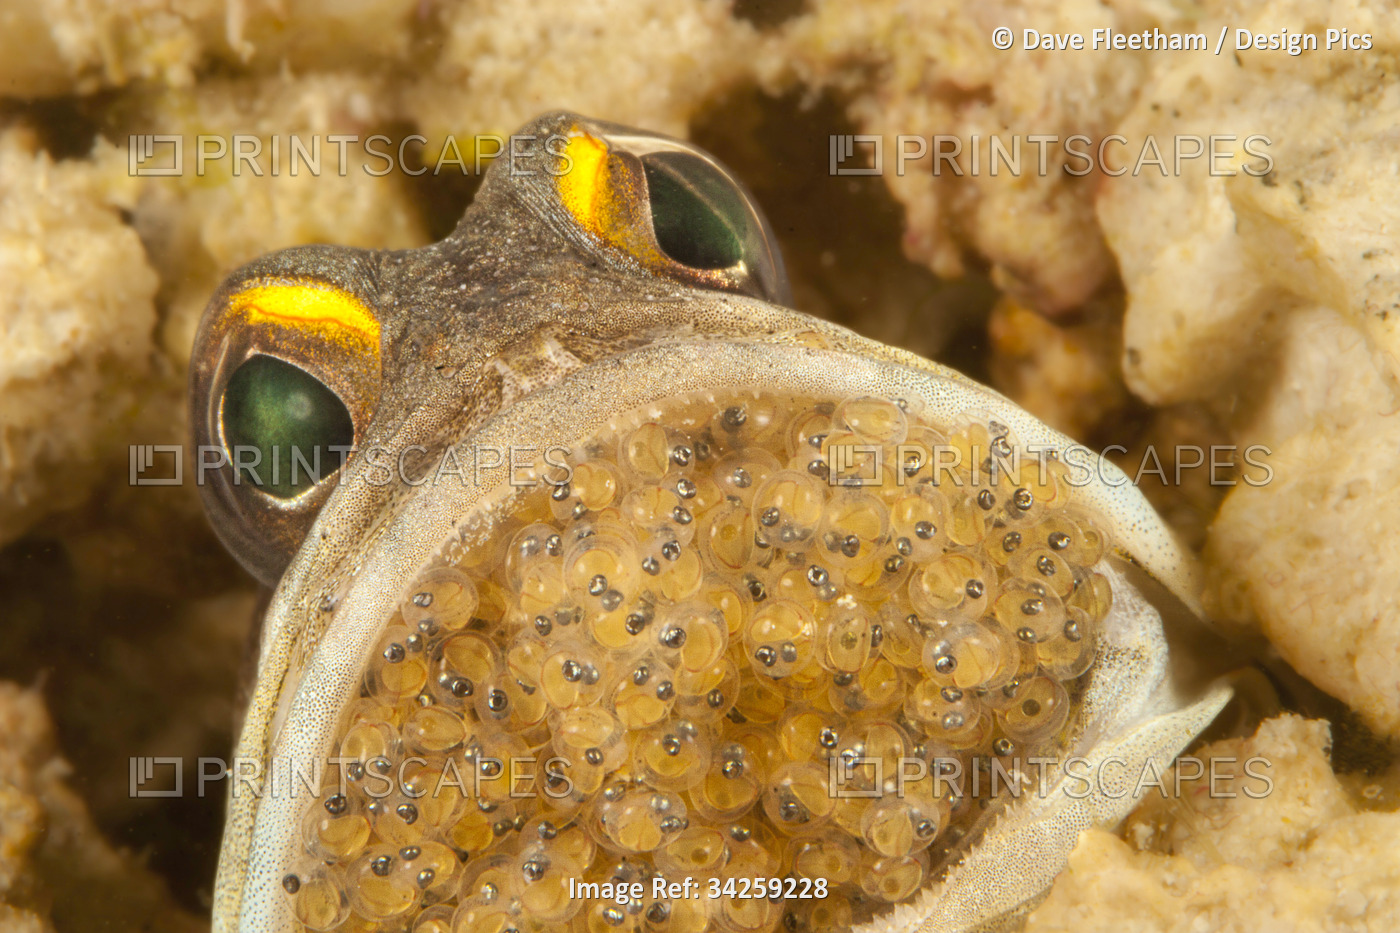 Male Gold-specs jawfish (Opistognathus randalli) with mouth brooding eggs, also ...